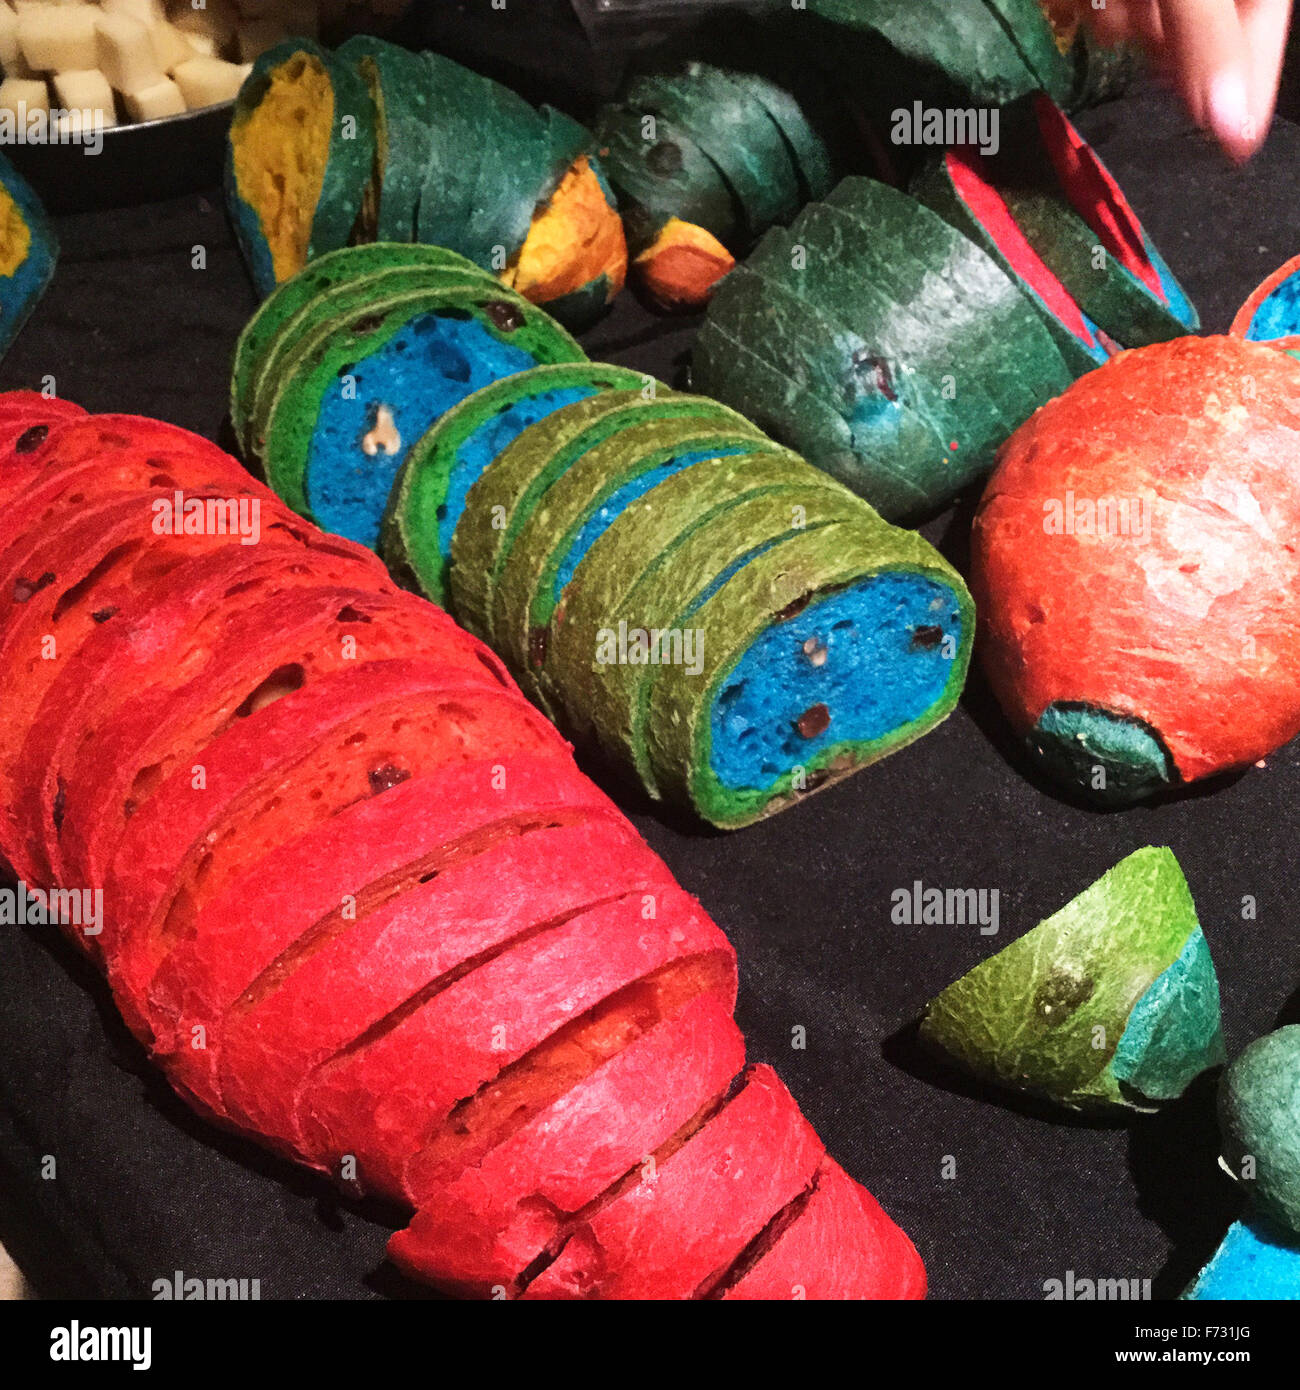 Artwork using bread baked with food coloring by the French artist Dorothée Selz at an exhibition at the French Cheese Board in New York on Thursday, November 12, 2015.  (© Richard B. Levine) Stock Photo